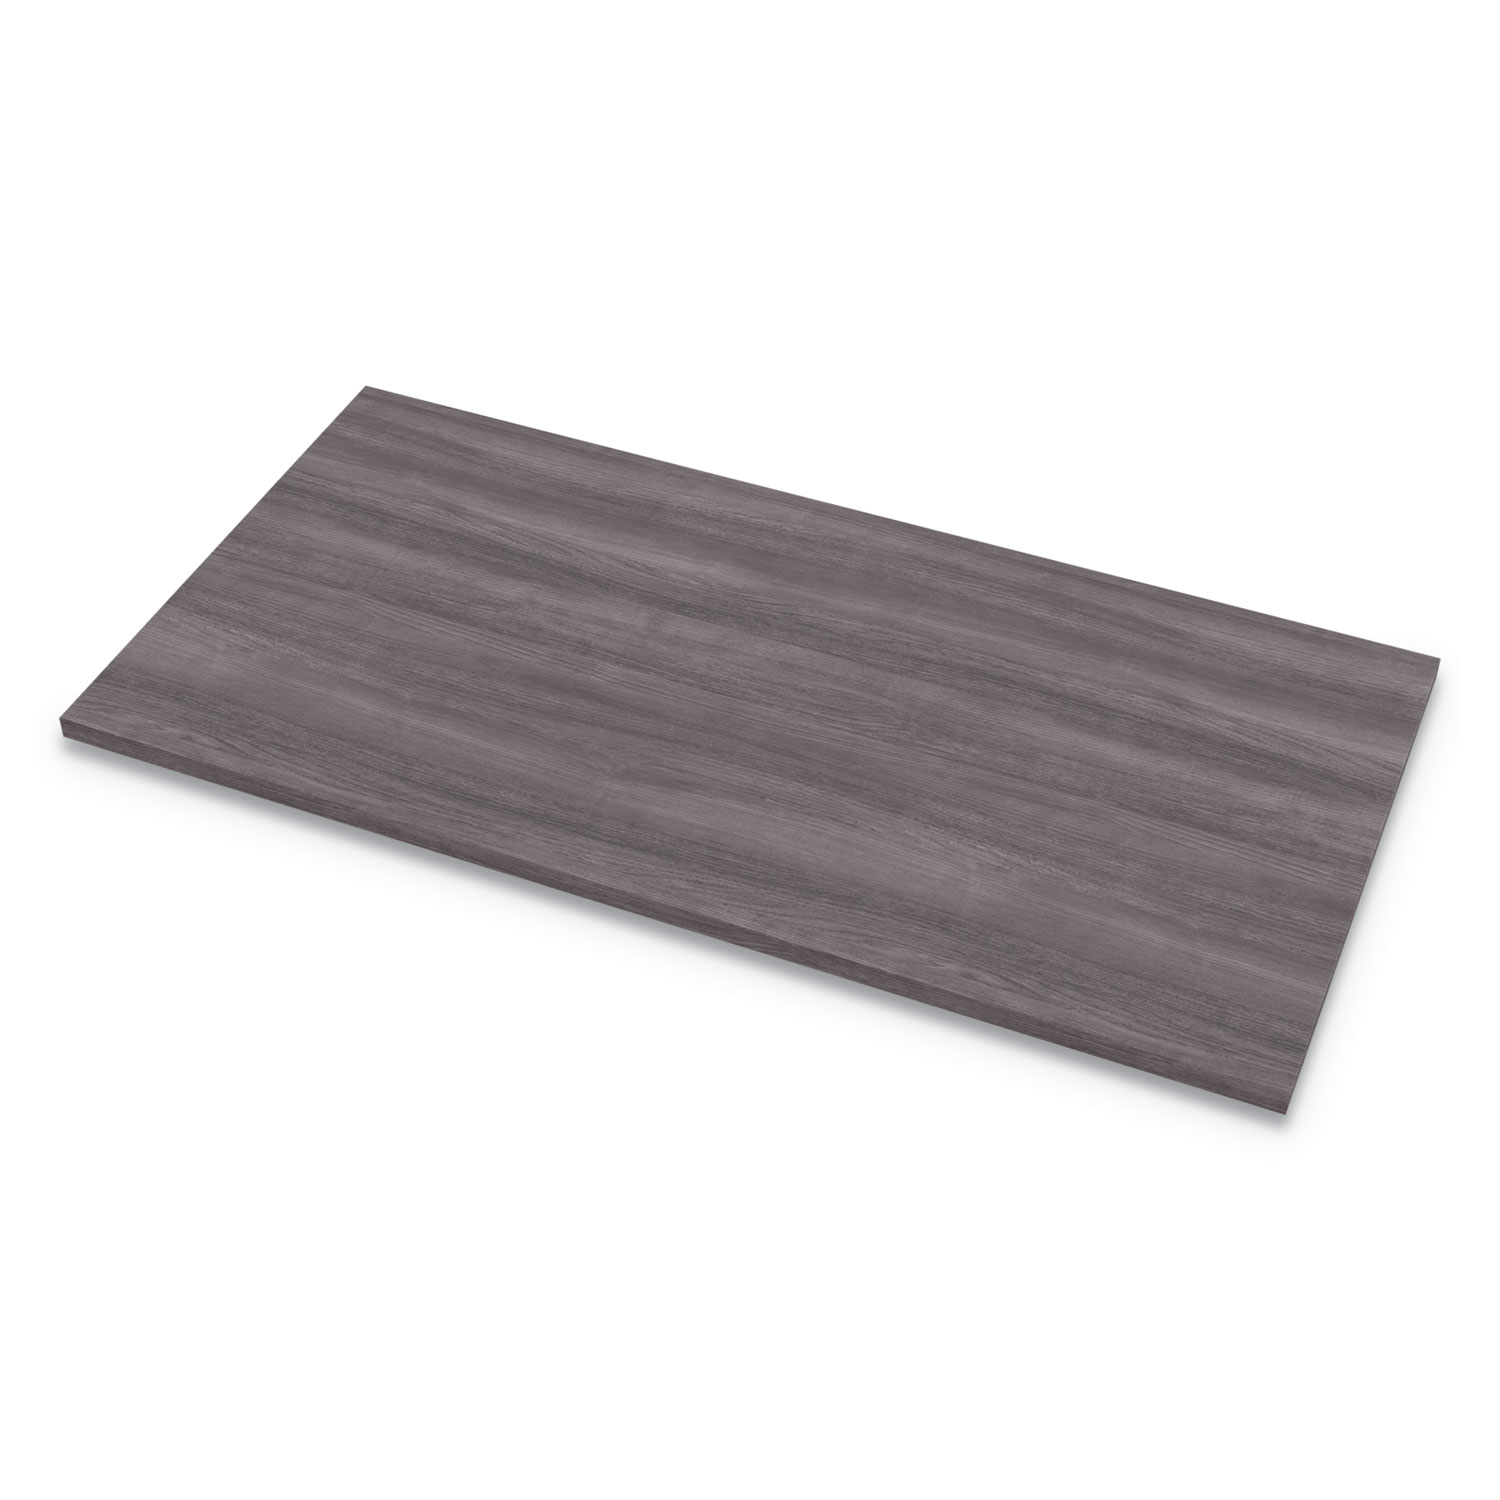 Levado Laminate Table Top (Top Only), 72w x 30d, Gray Ash